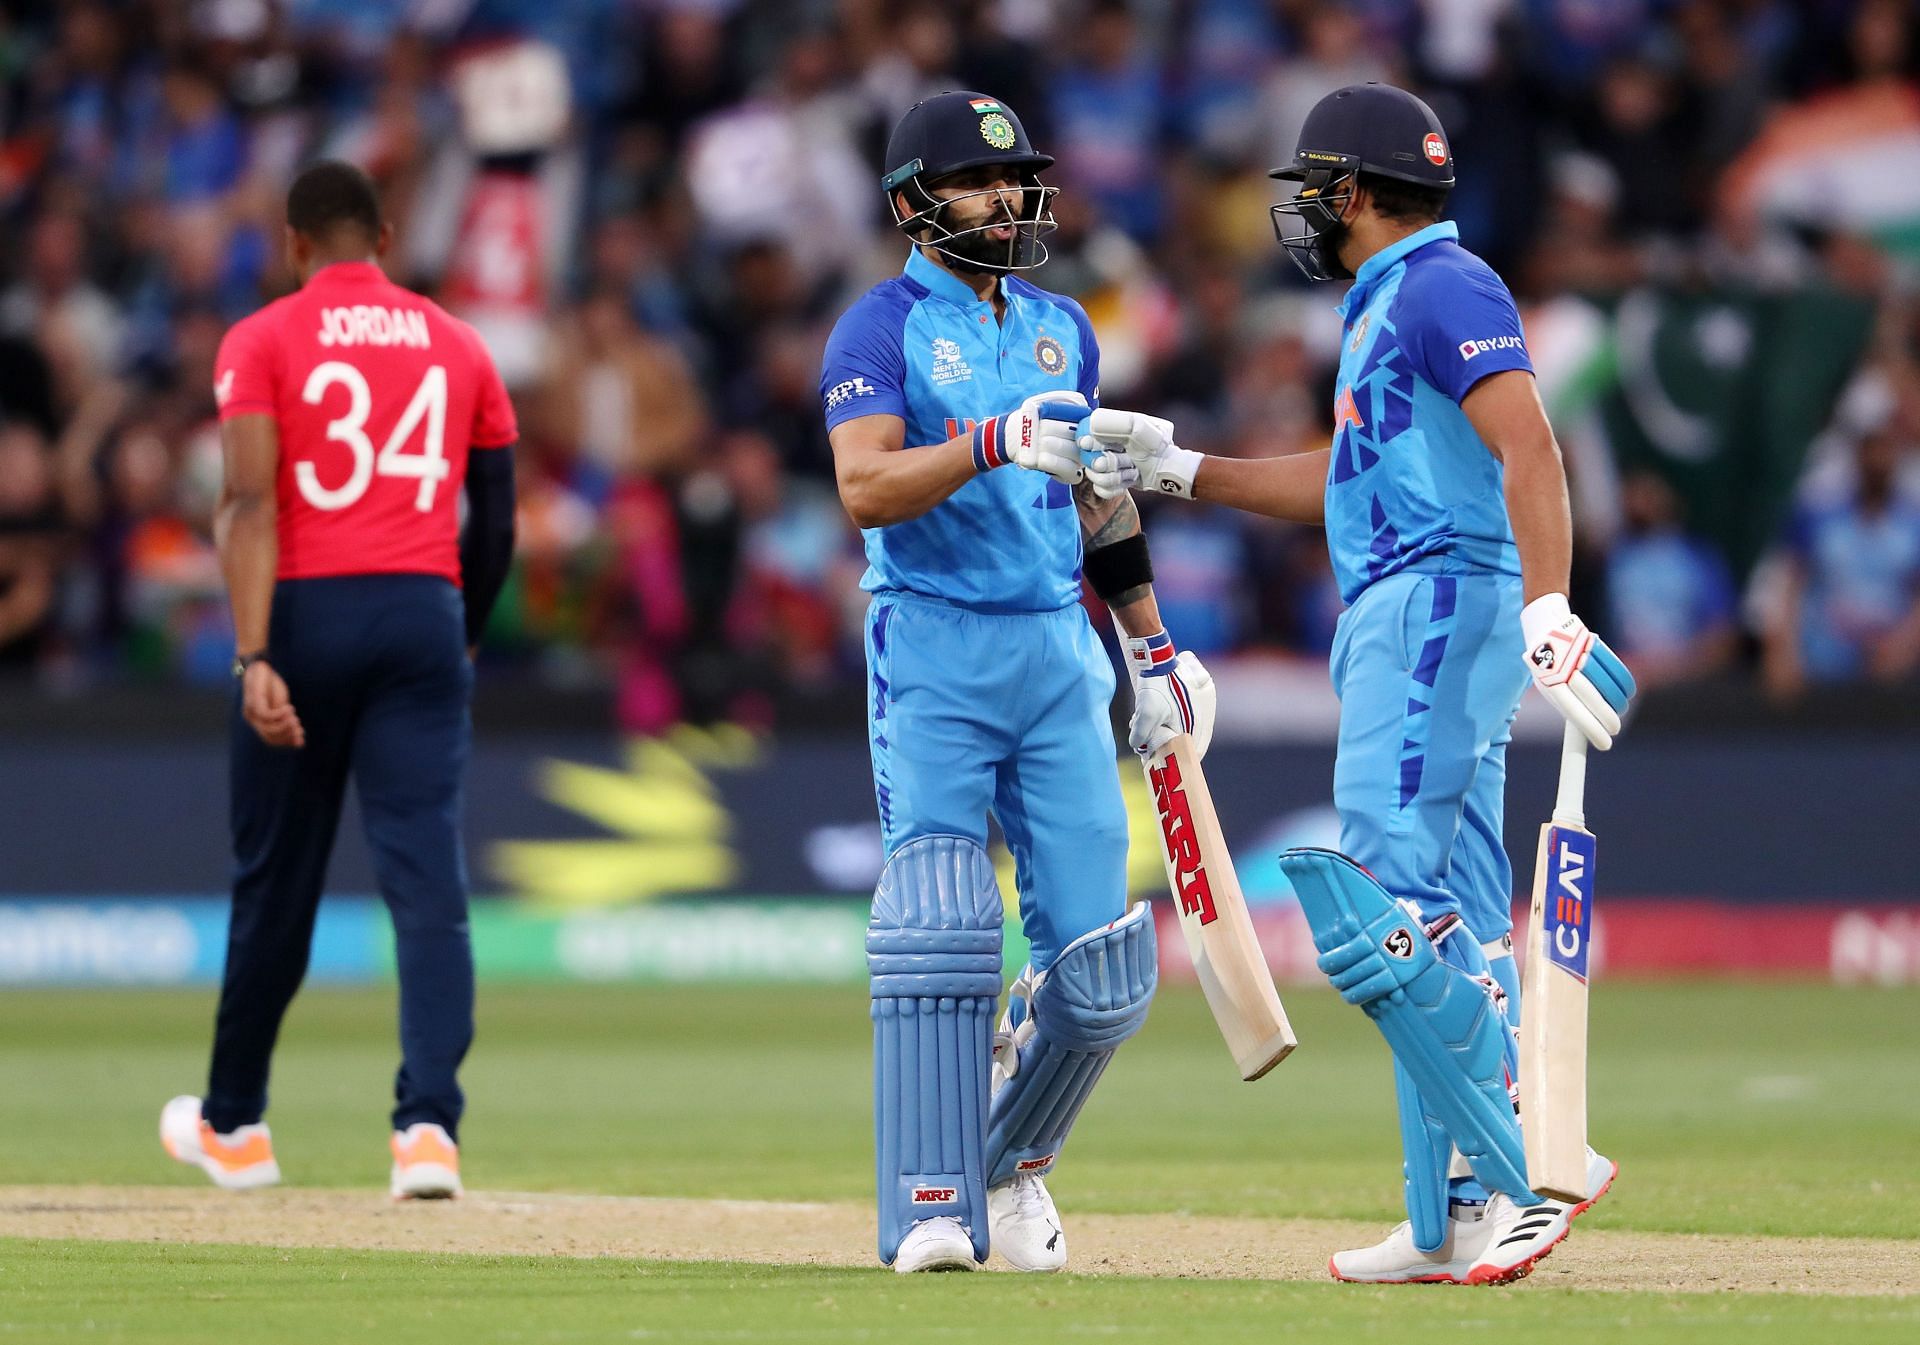 India scored only 38 runs in the powerplay overs.